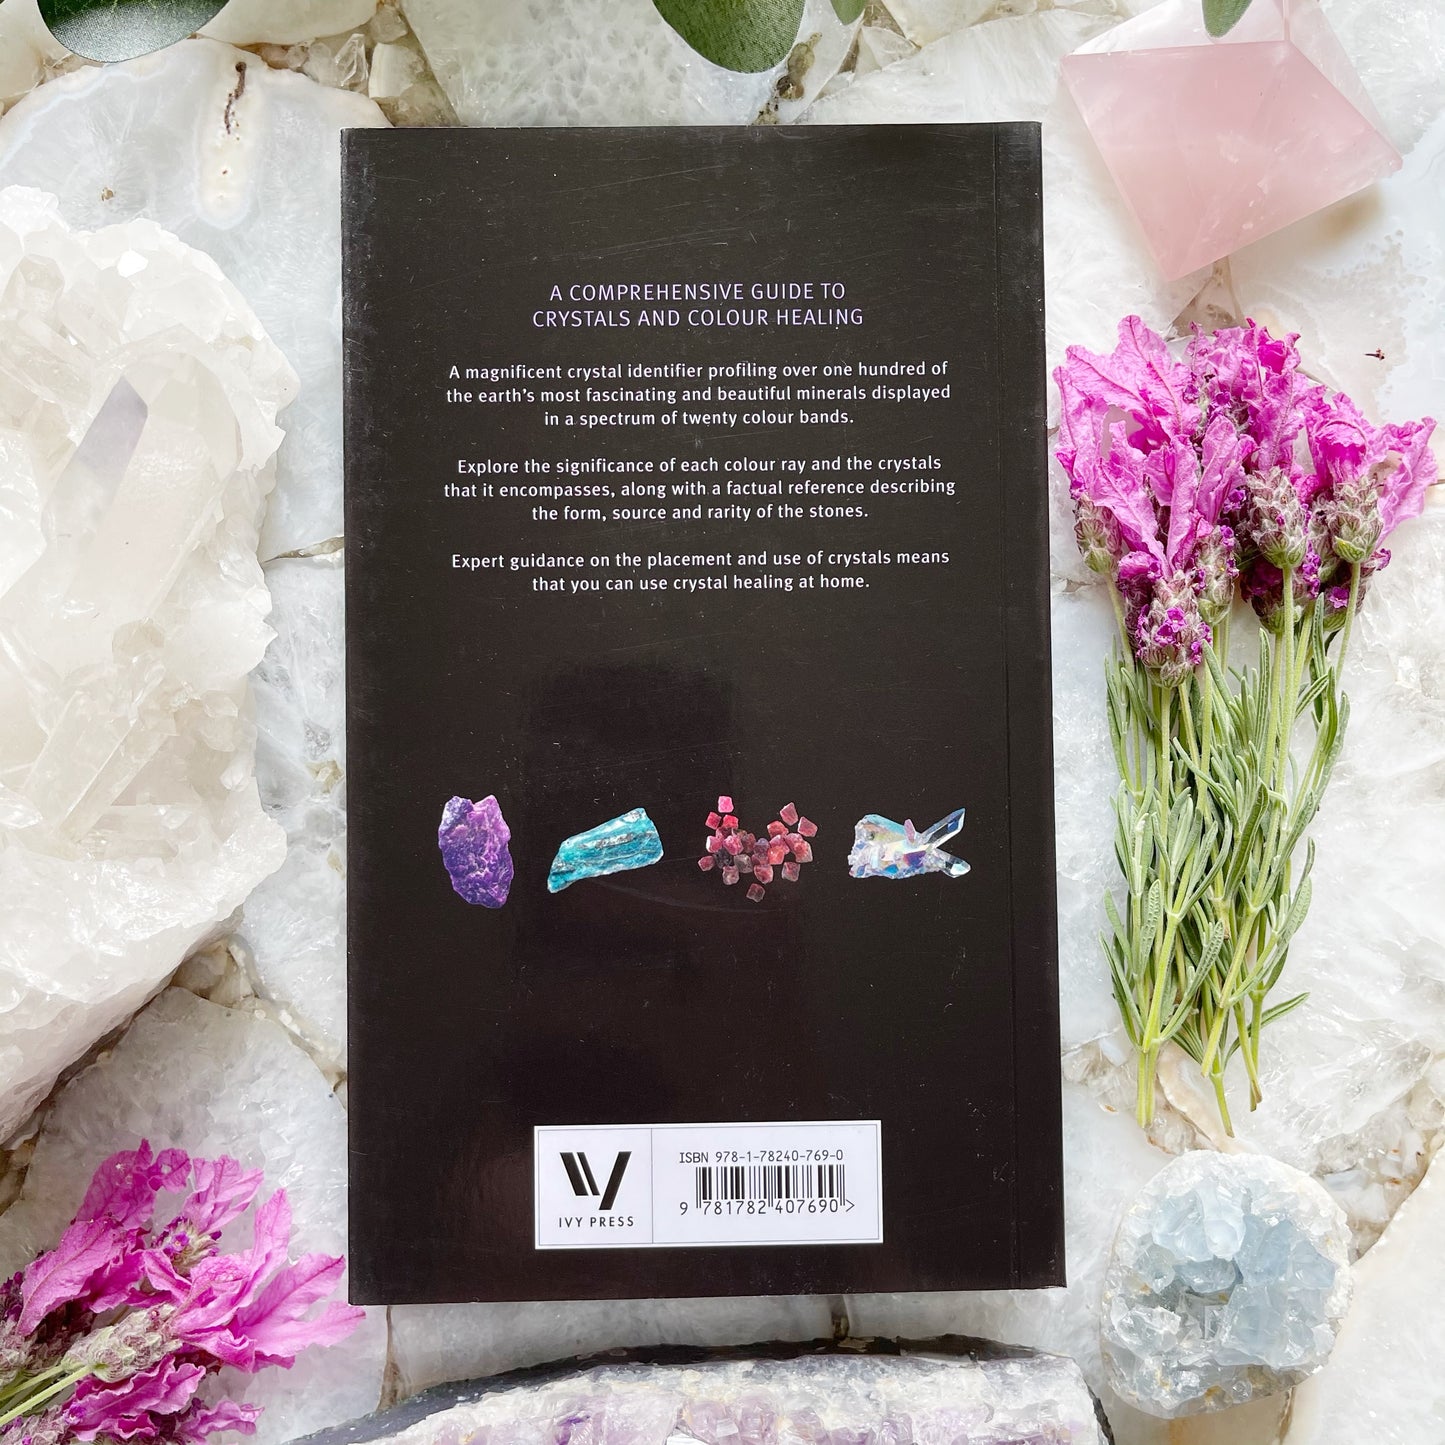 Crystals: A Complete Guide to Crystals and Colour Healing